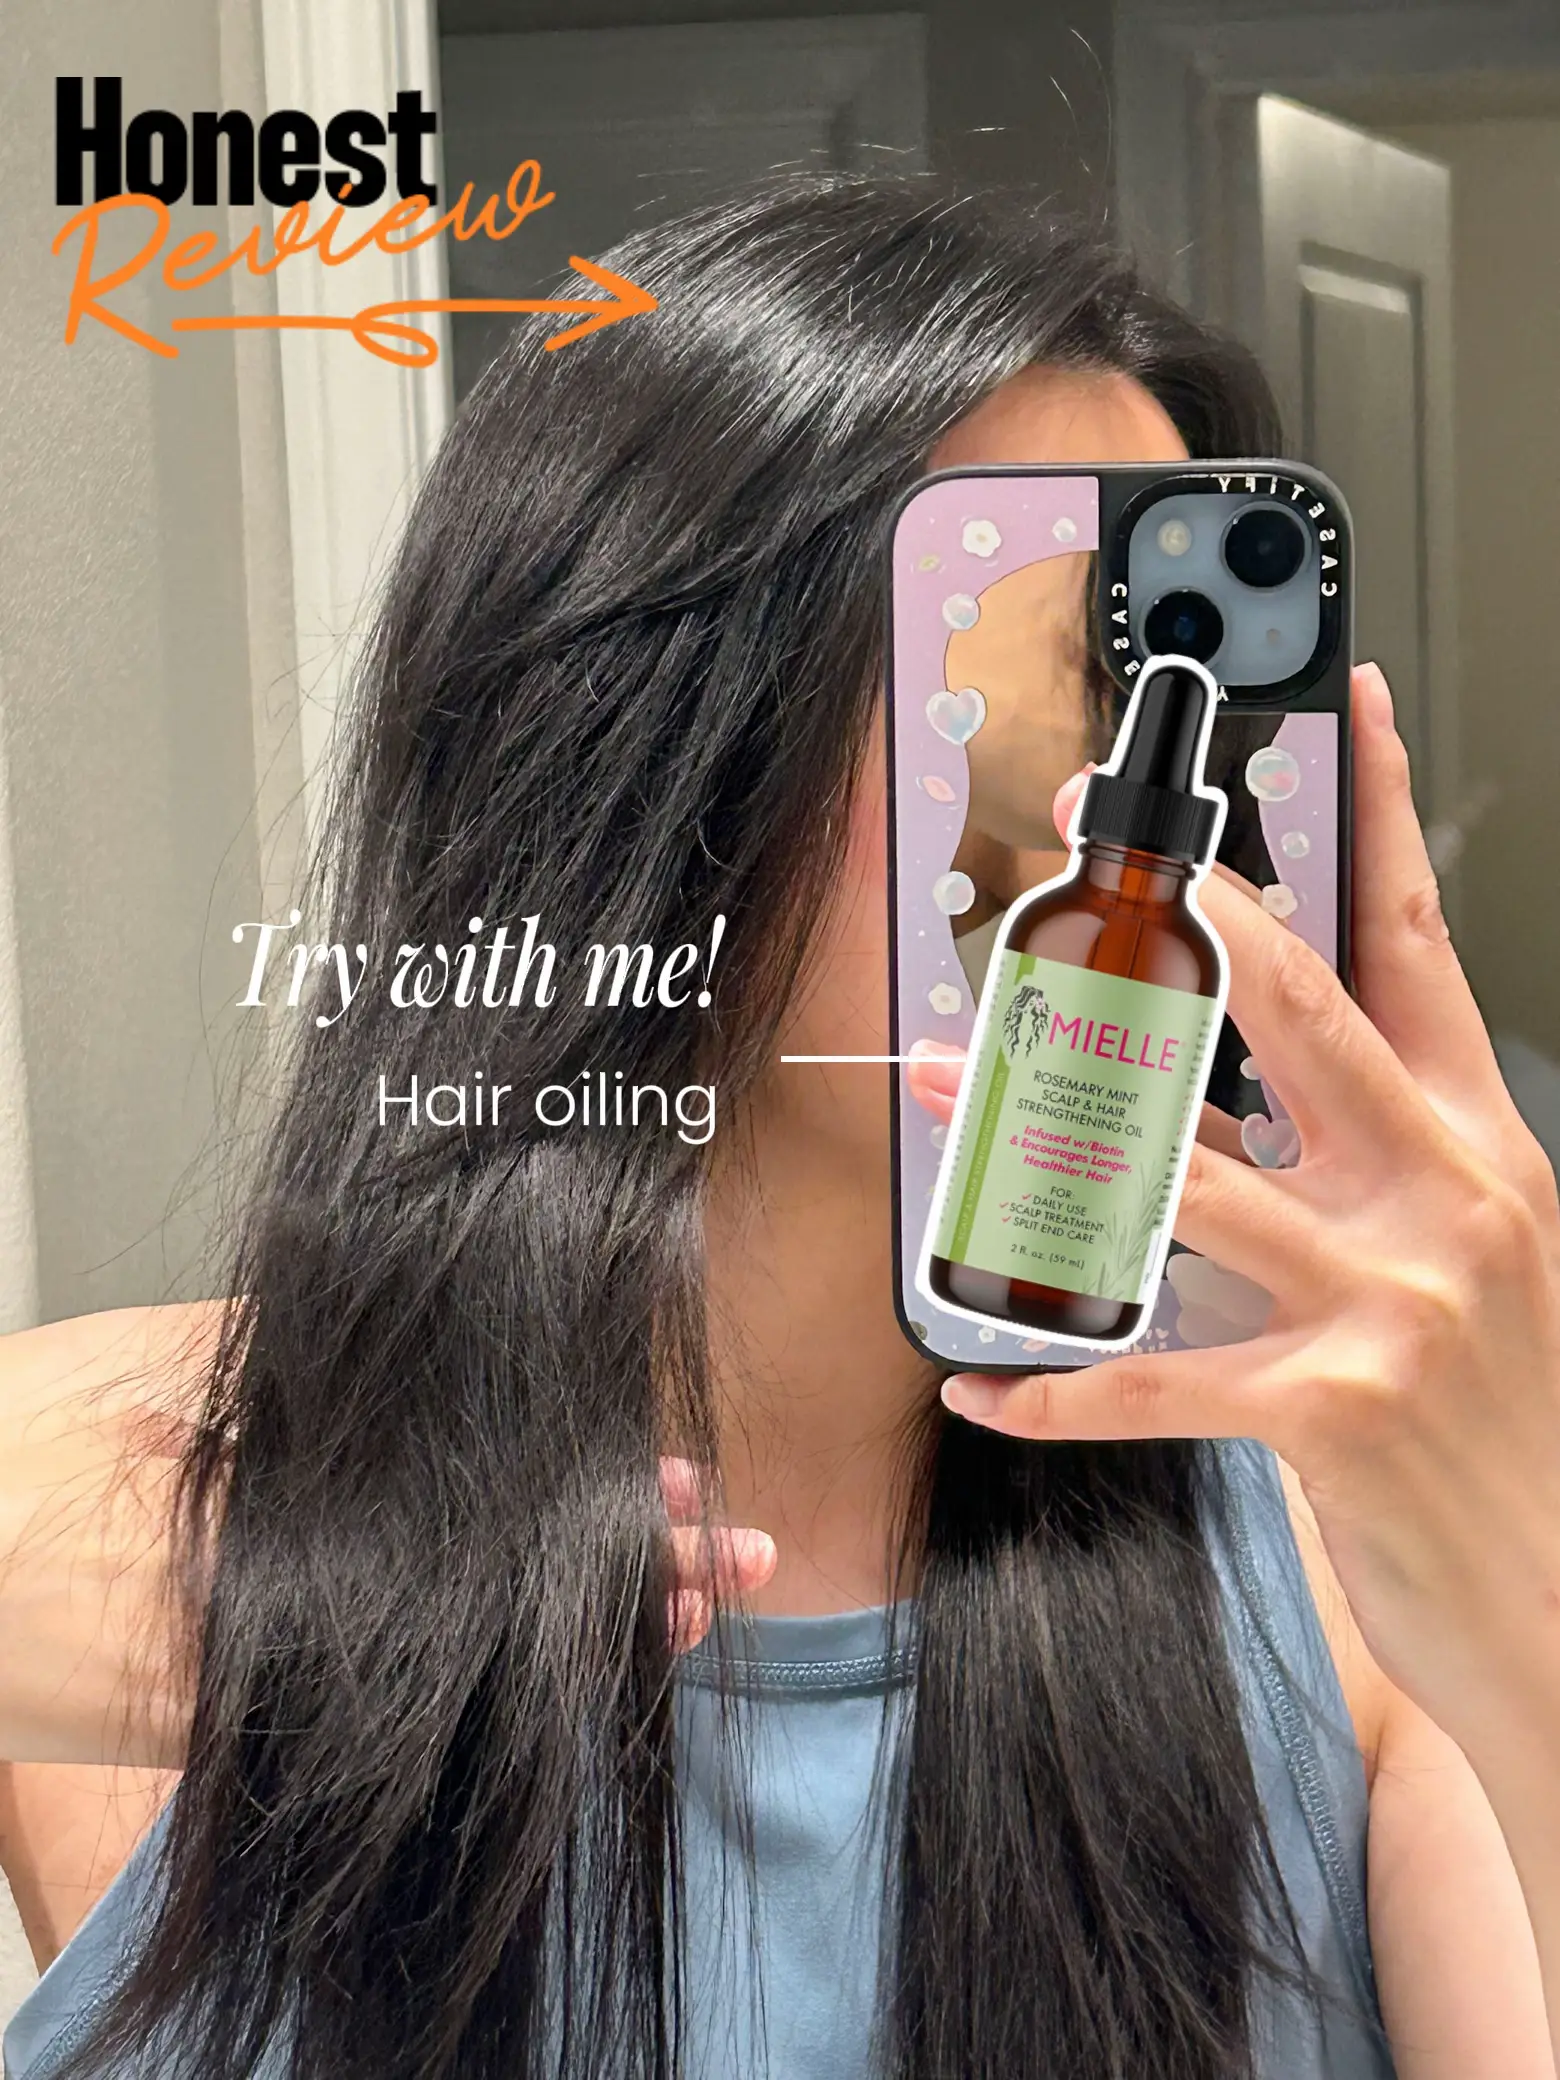 Review: I Tried Mielle's Rosemary Mint Hair Growth Oil